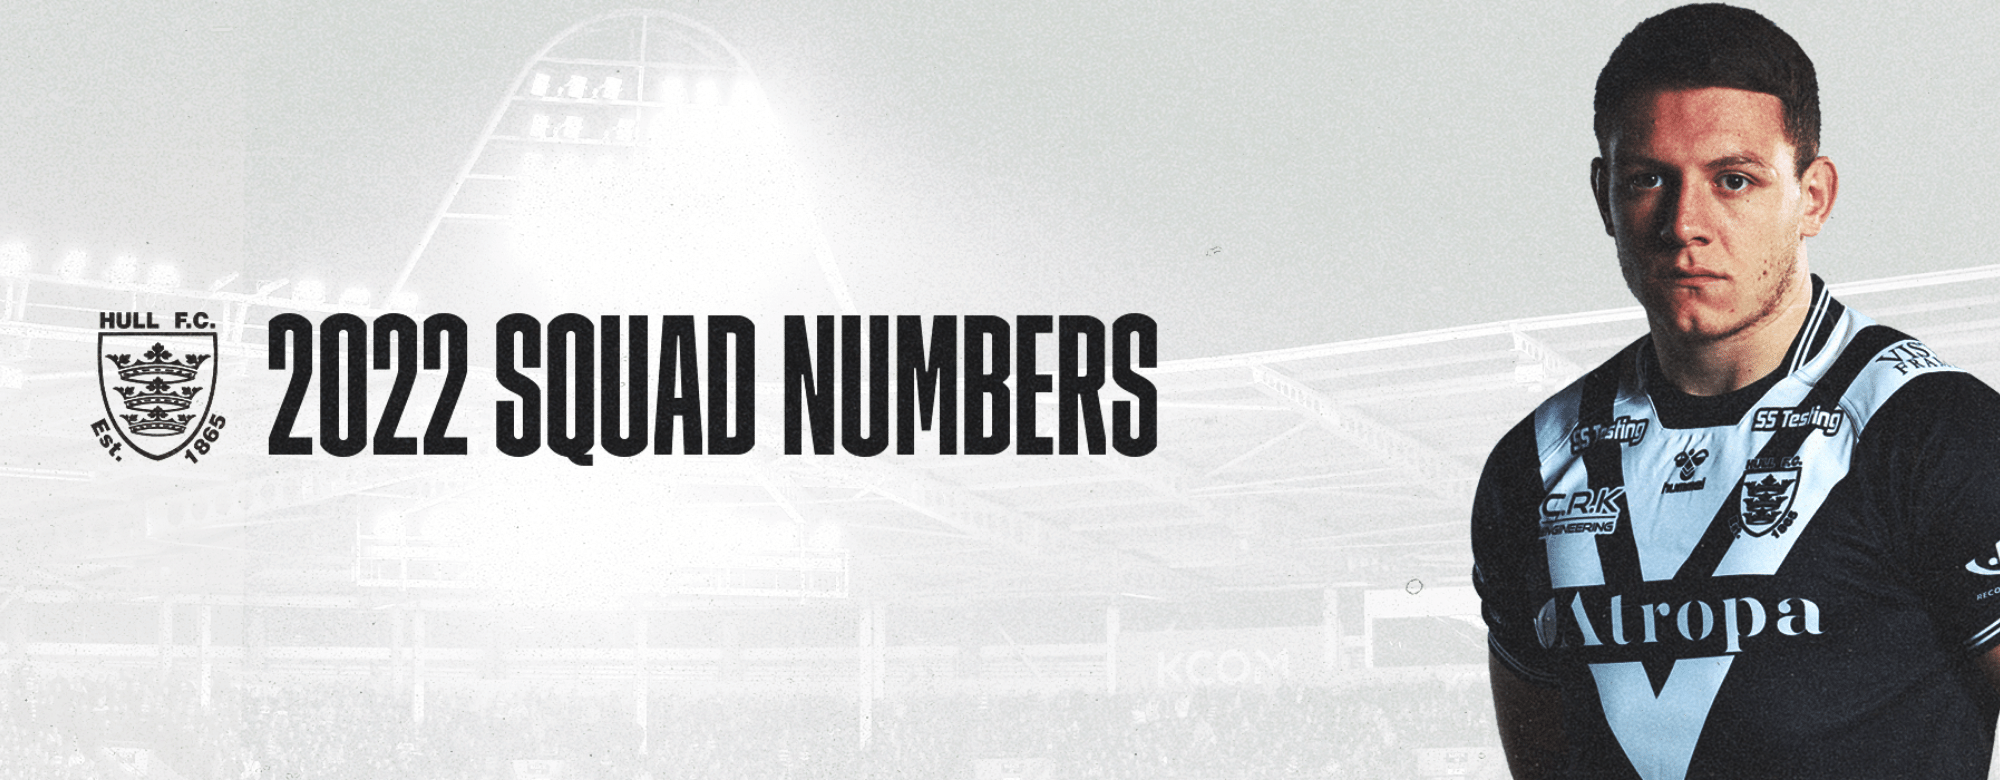 Hull FC Announce 2022 Squad Numbers